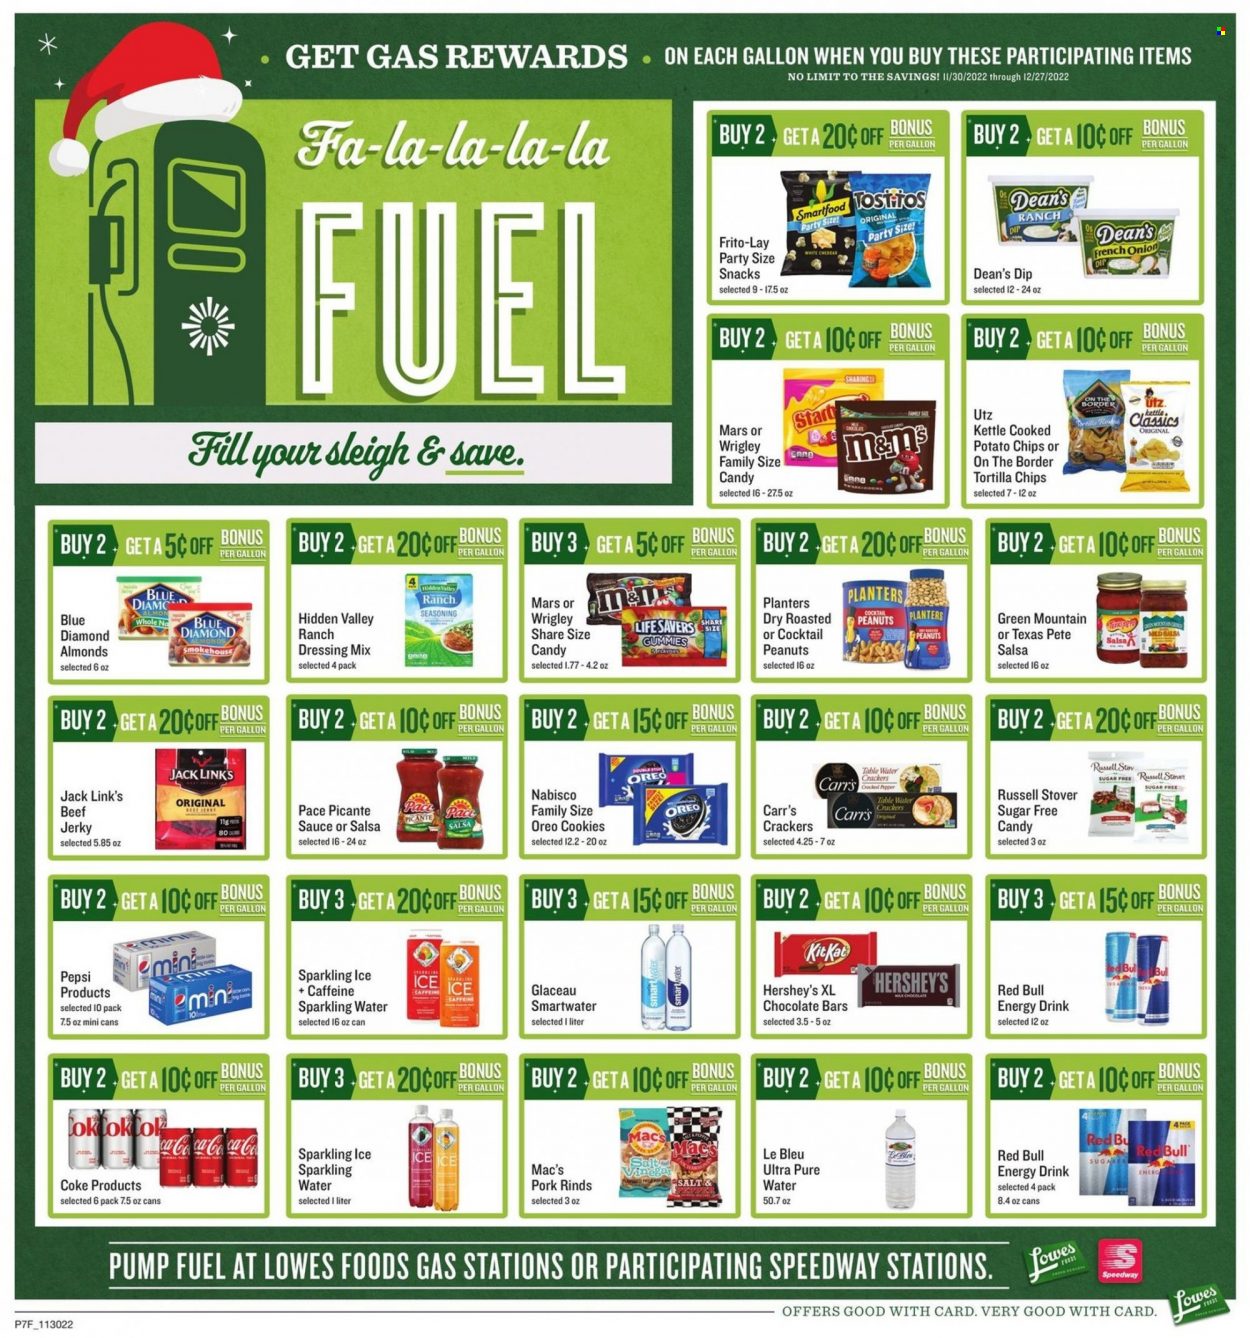 thumbnail - Lowes Foods Flyer - 11/30/2022 - 12/27/2022 - Sales products - beef jerky, jerky, Oreo, ranch dressing, dip, Hershey's, cookies, snack, Mars, KitKat, M&M's, crackers, chocolate bar, tortilla chips, potato chips, chips, Smartfood, Frito-Lay, Jack Link's, spice, dressing, salsa, almonds, peanuts, Planters, Blue Diamond, Coca-Cola, Pepsi, energy drink, Red Bull, sparkling water, purified water, Smartwater, Green Mountain, Mac’s. Page 7.